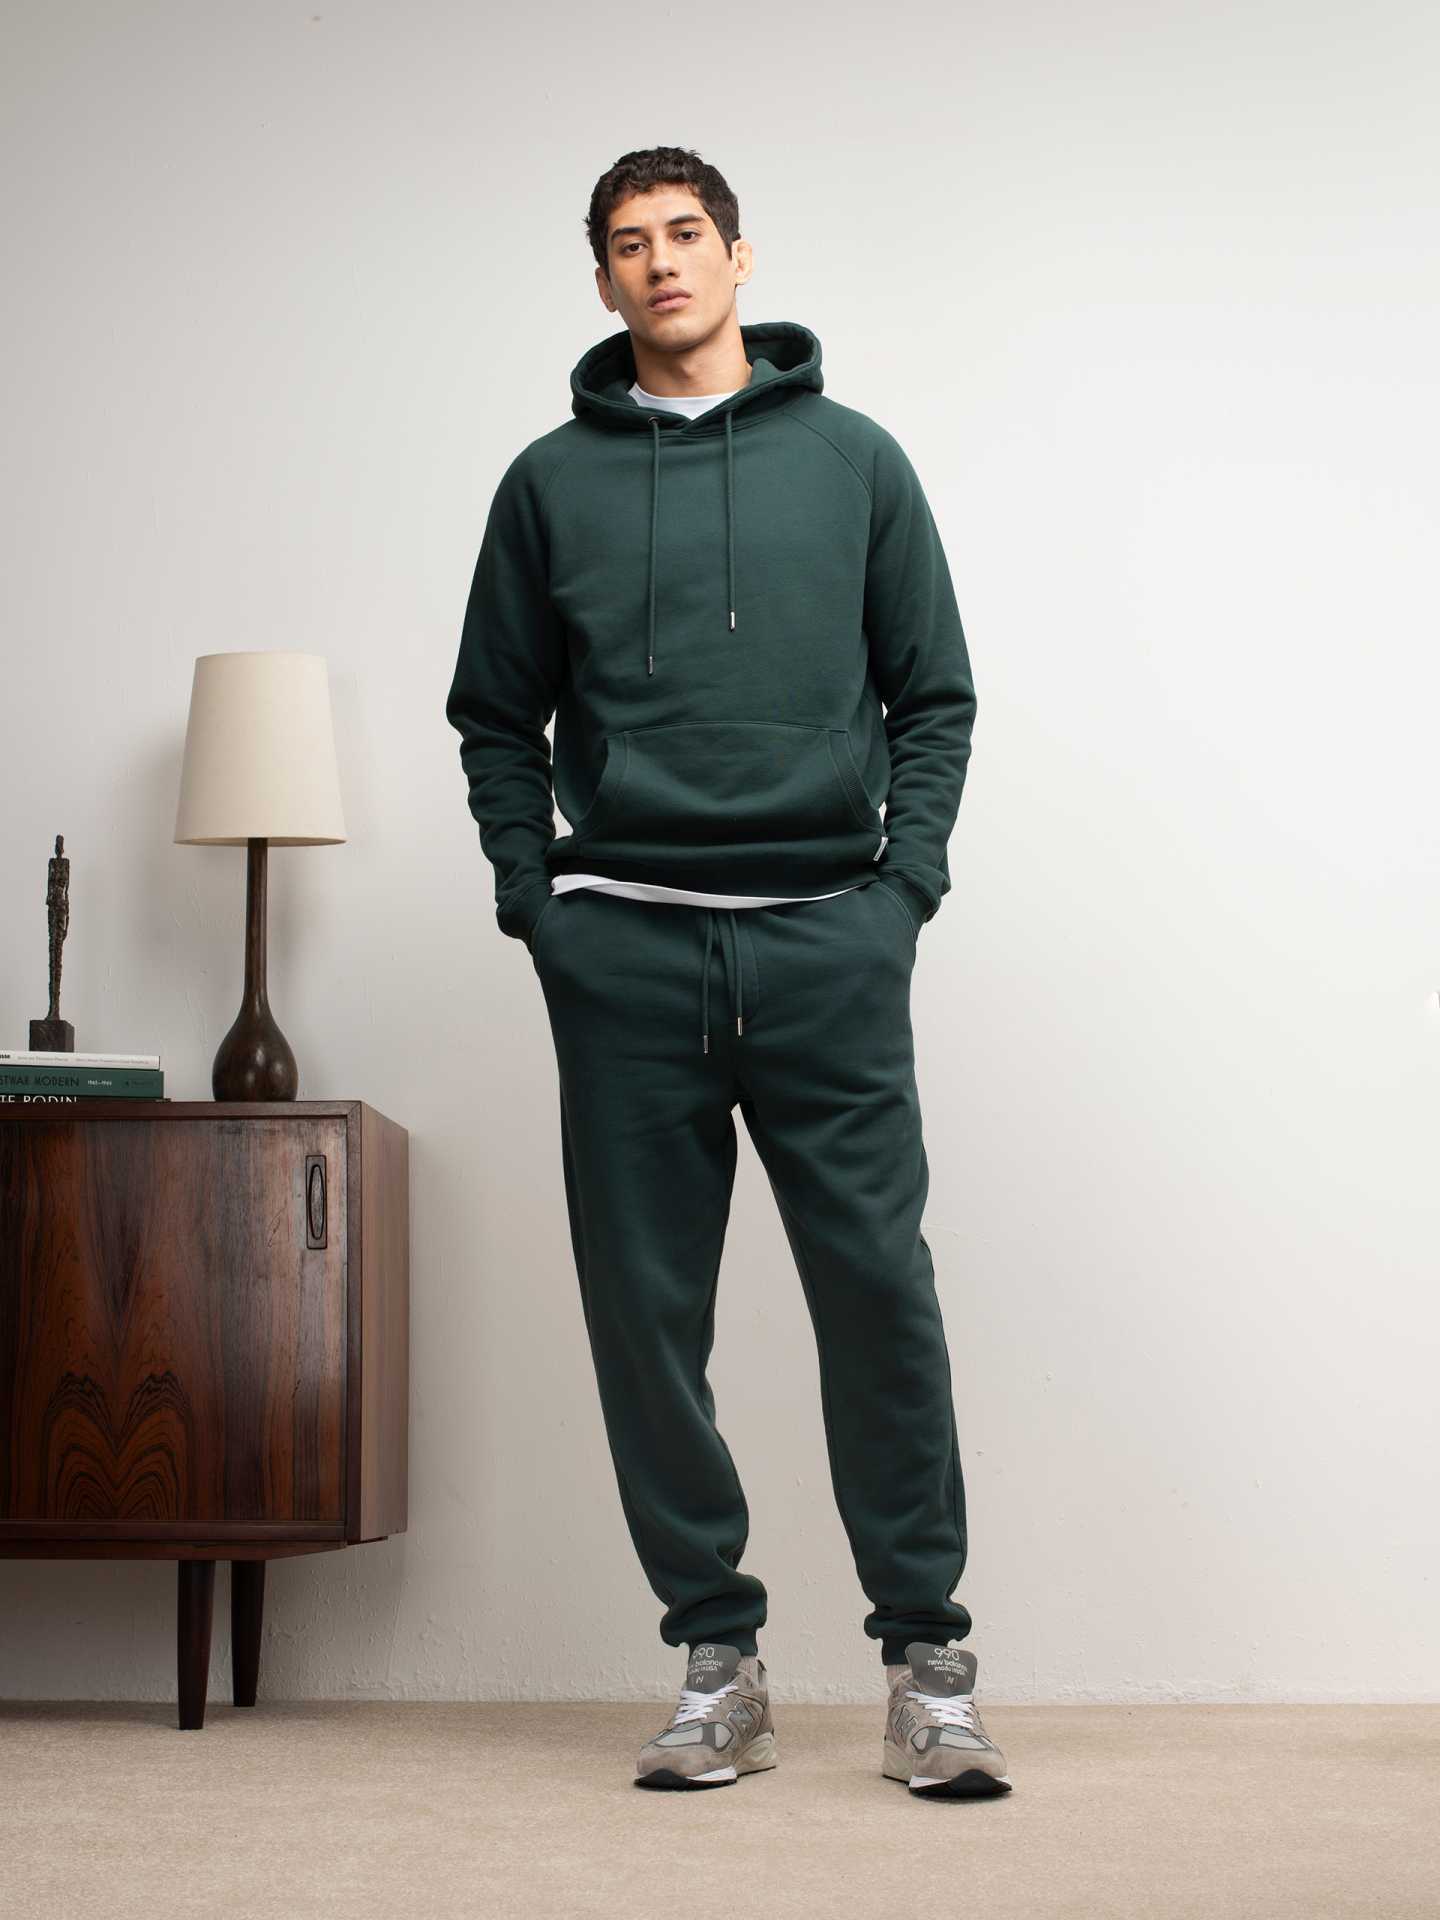 Hamilton & Hare model wears pullover hood track pant in gate green, priced £165 and £130 respectively.